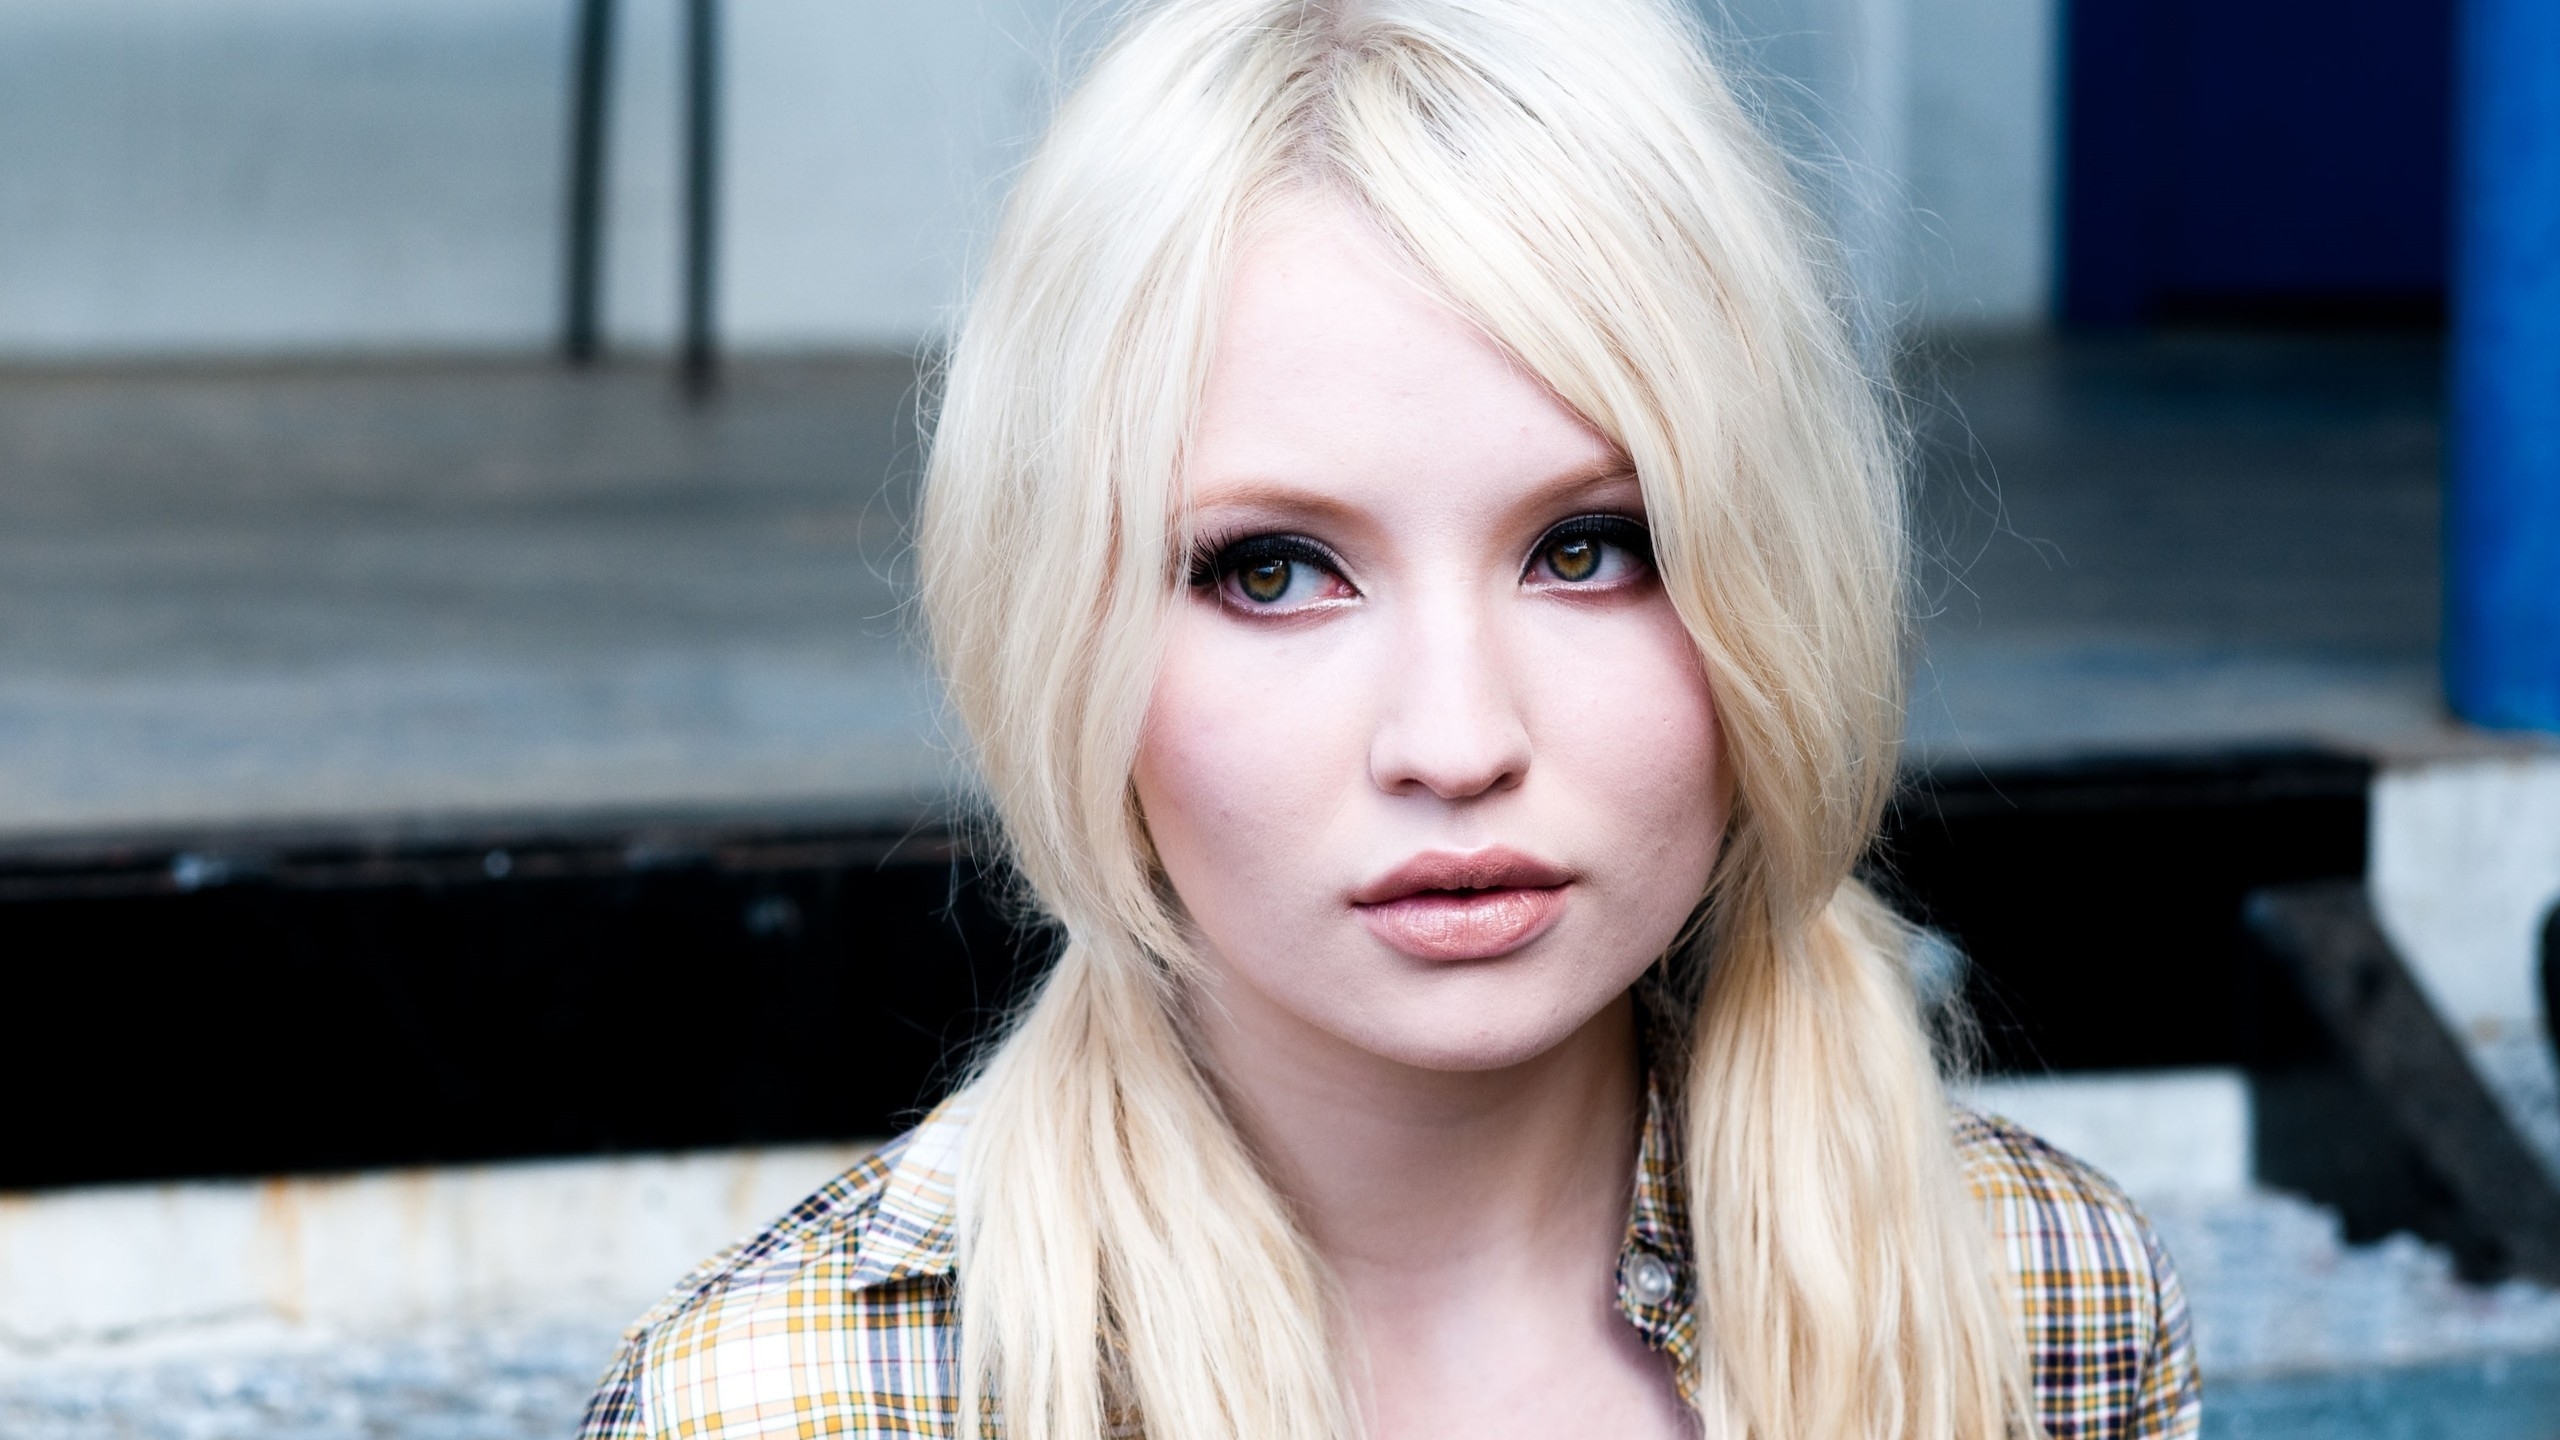 Emily Browning for 2560x1440 HDTV resolution